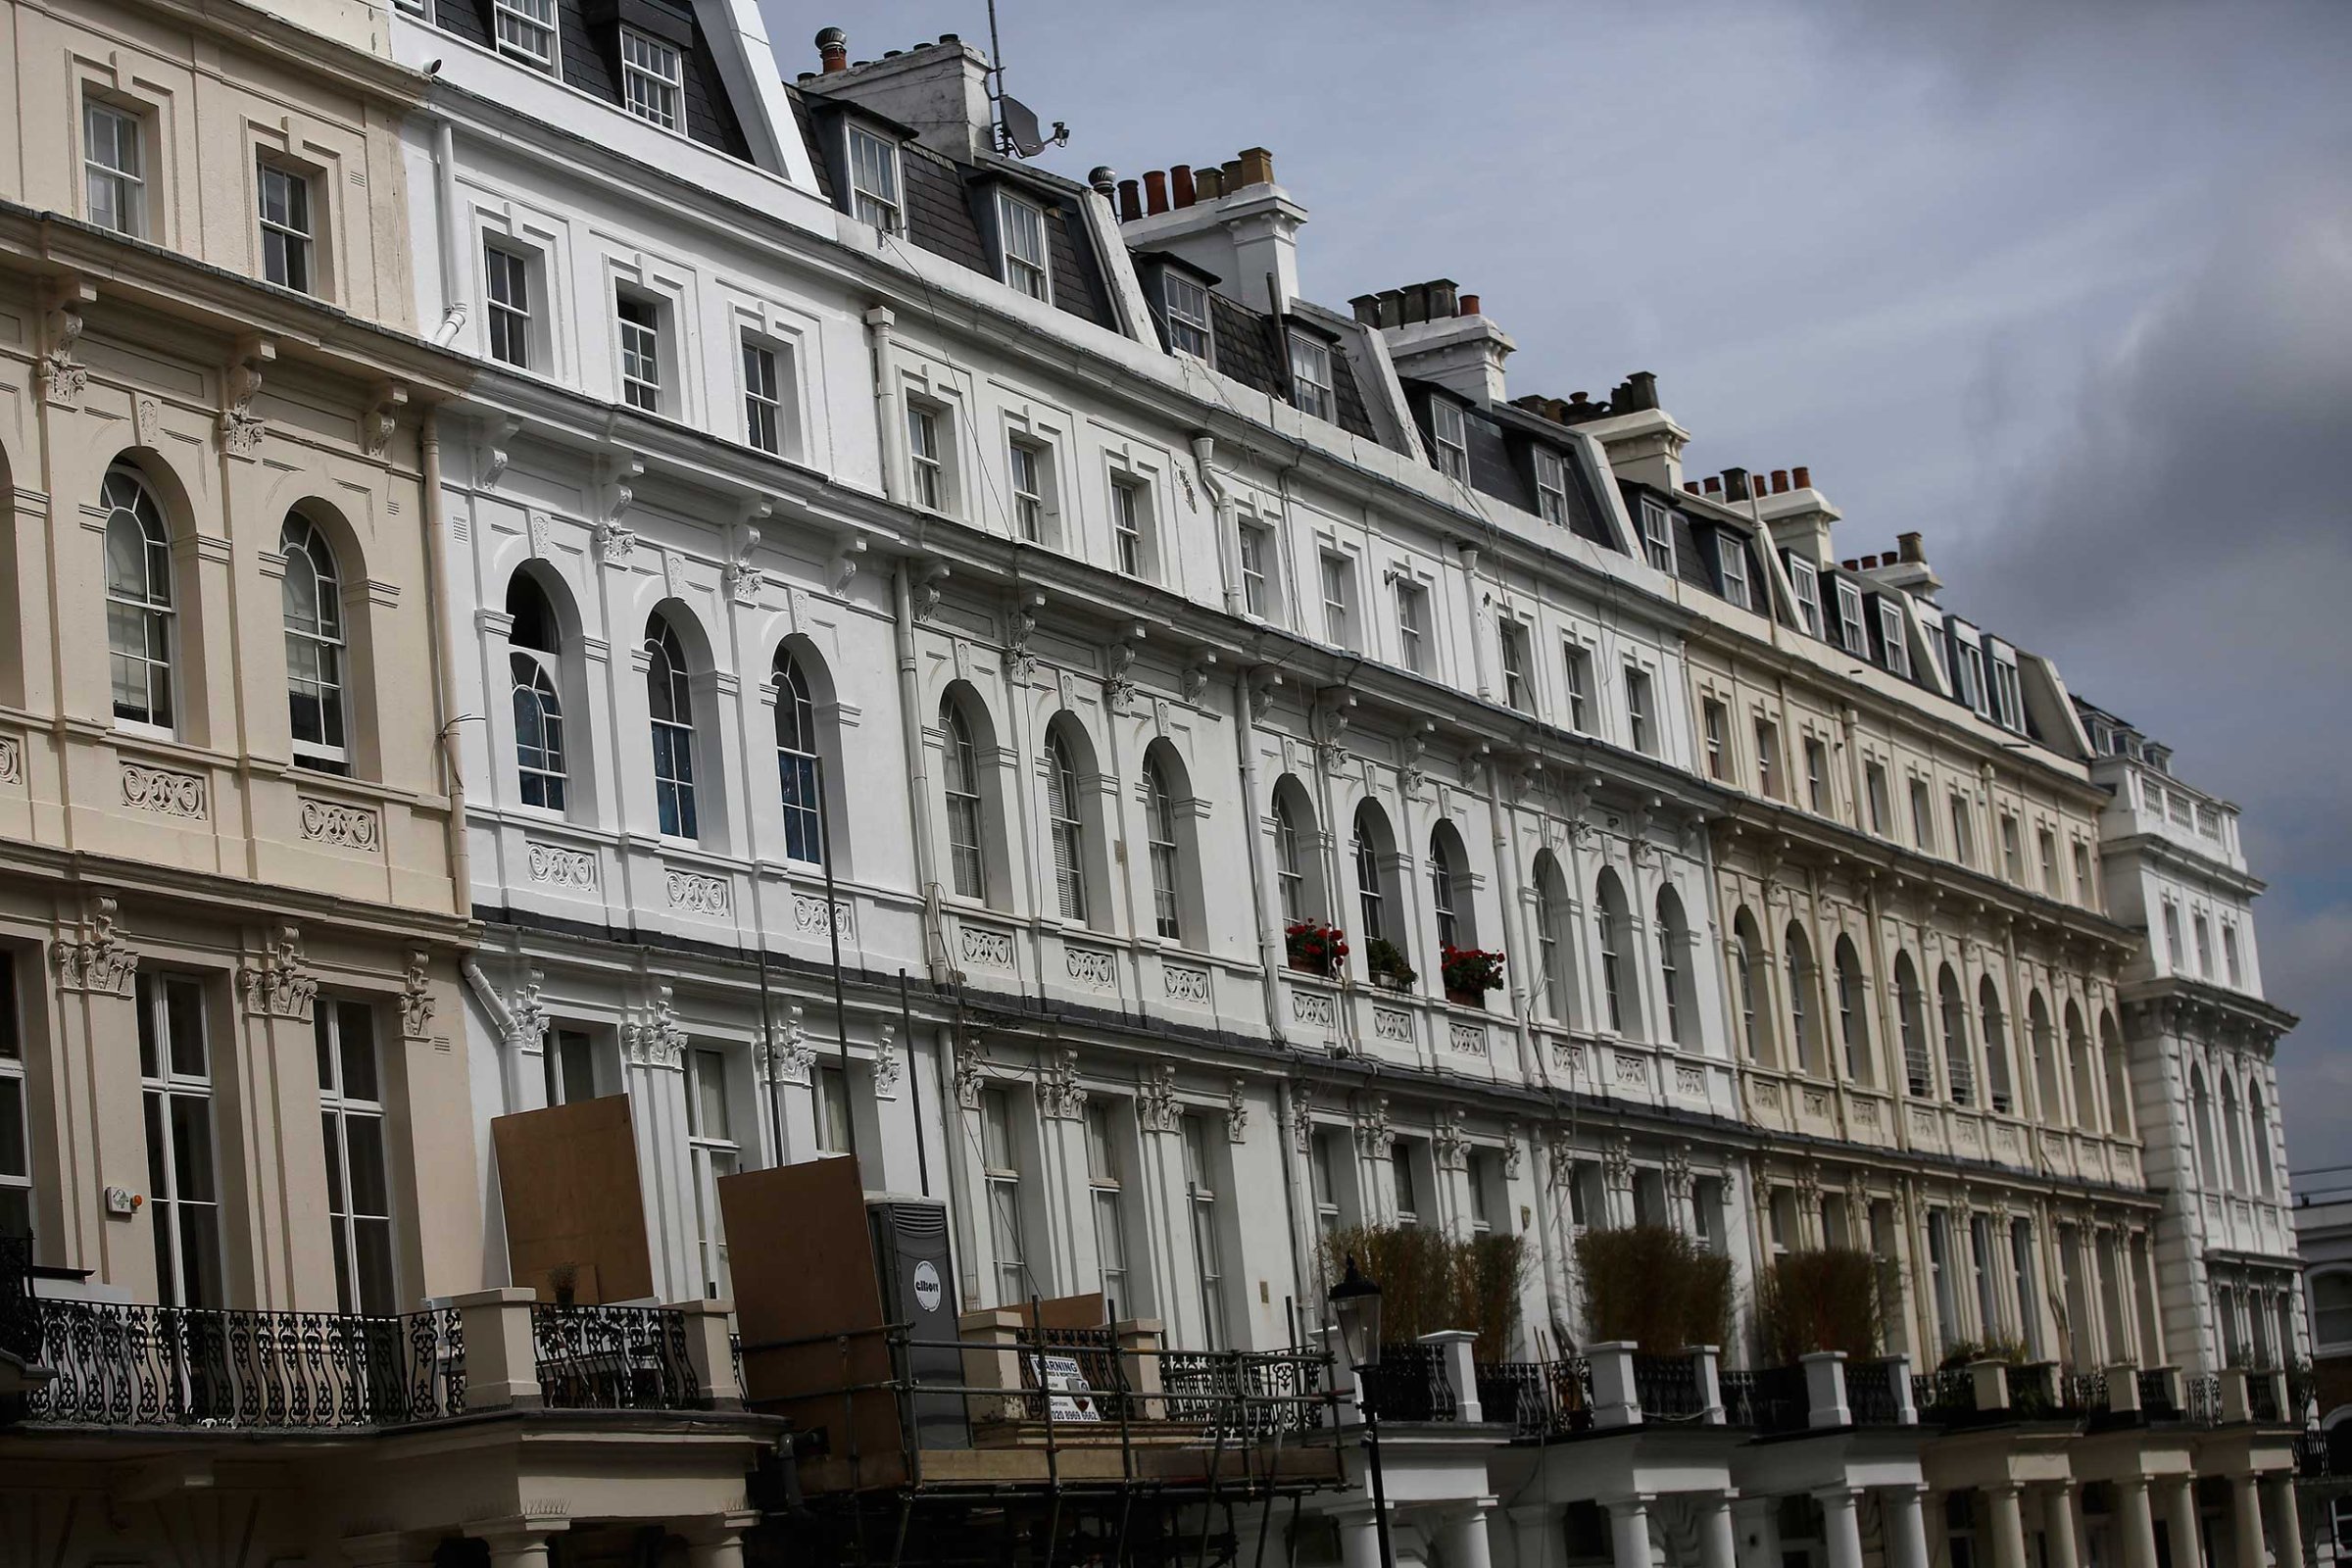 Rows of luxury residential properties stand in the Kensington and Chelsea districts of London, Aug. 10, 2015.